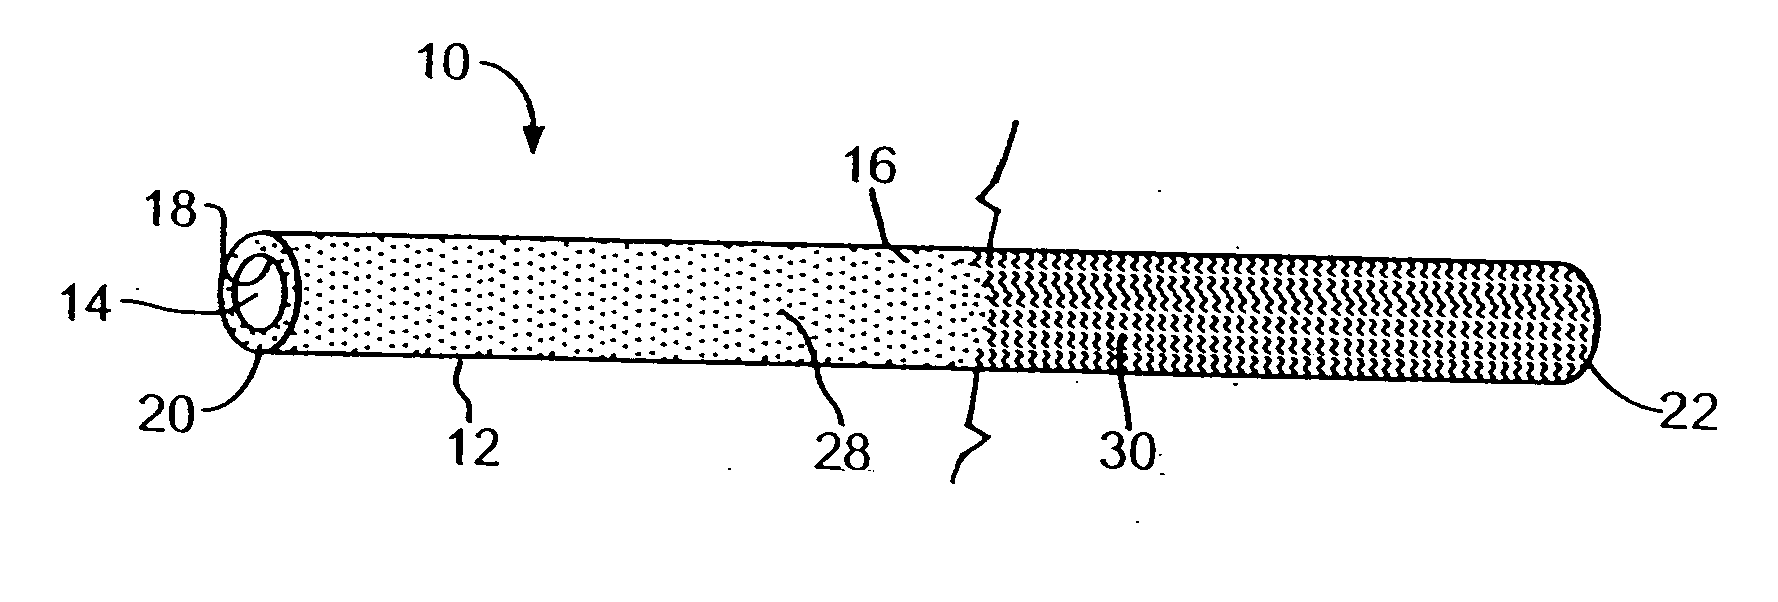 Hydrophilic coated medical device